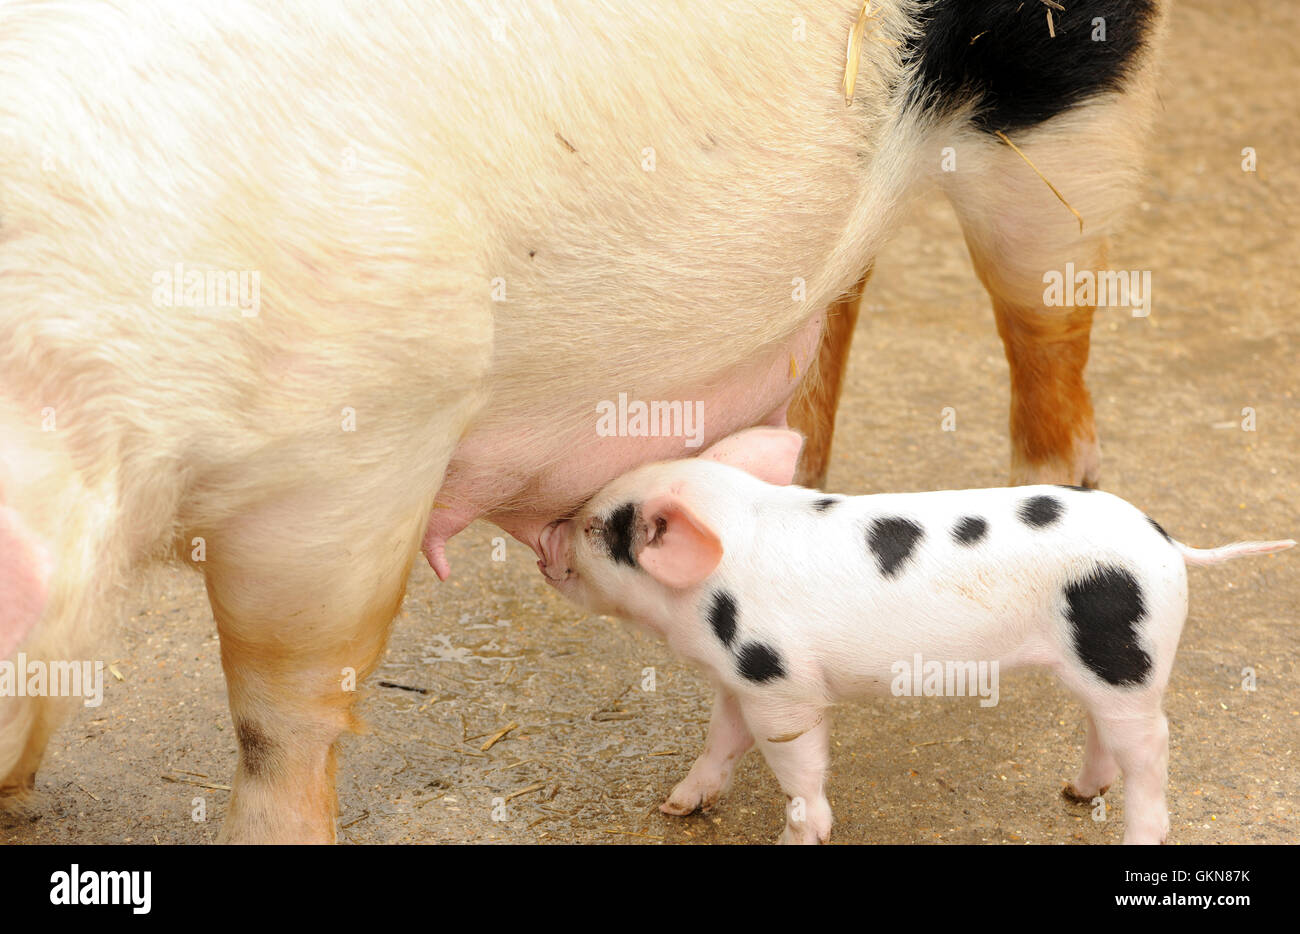 A spotted piglet suckles. Lewes, East Sussex, UK Stock Photo